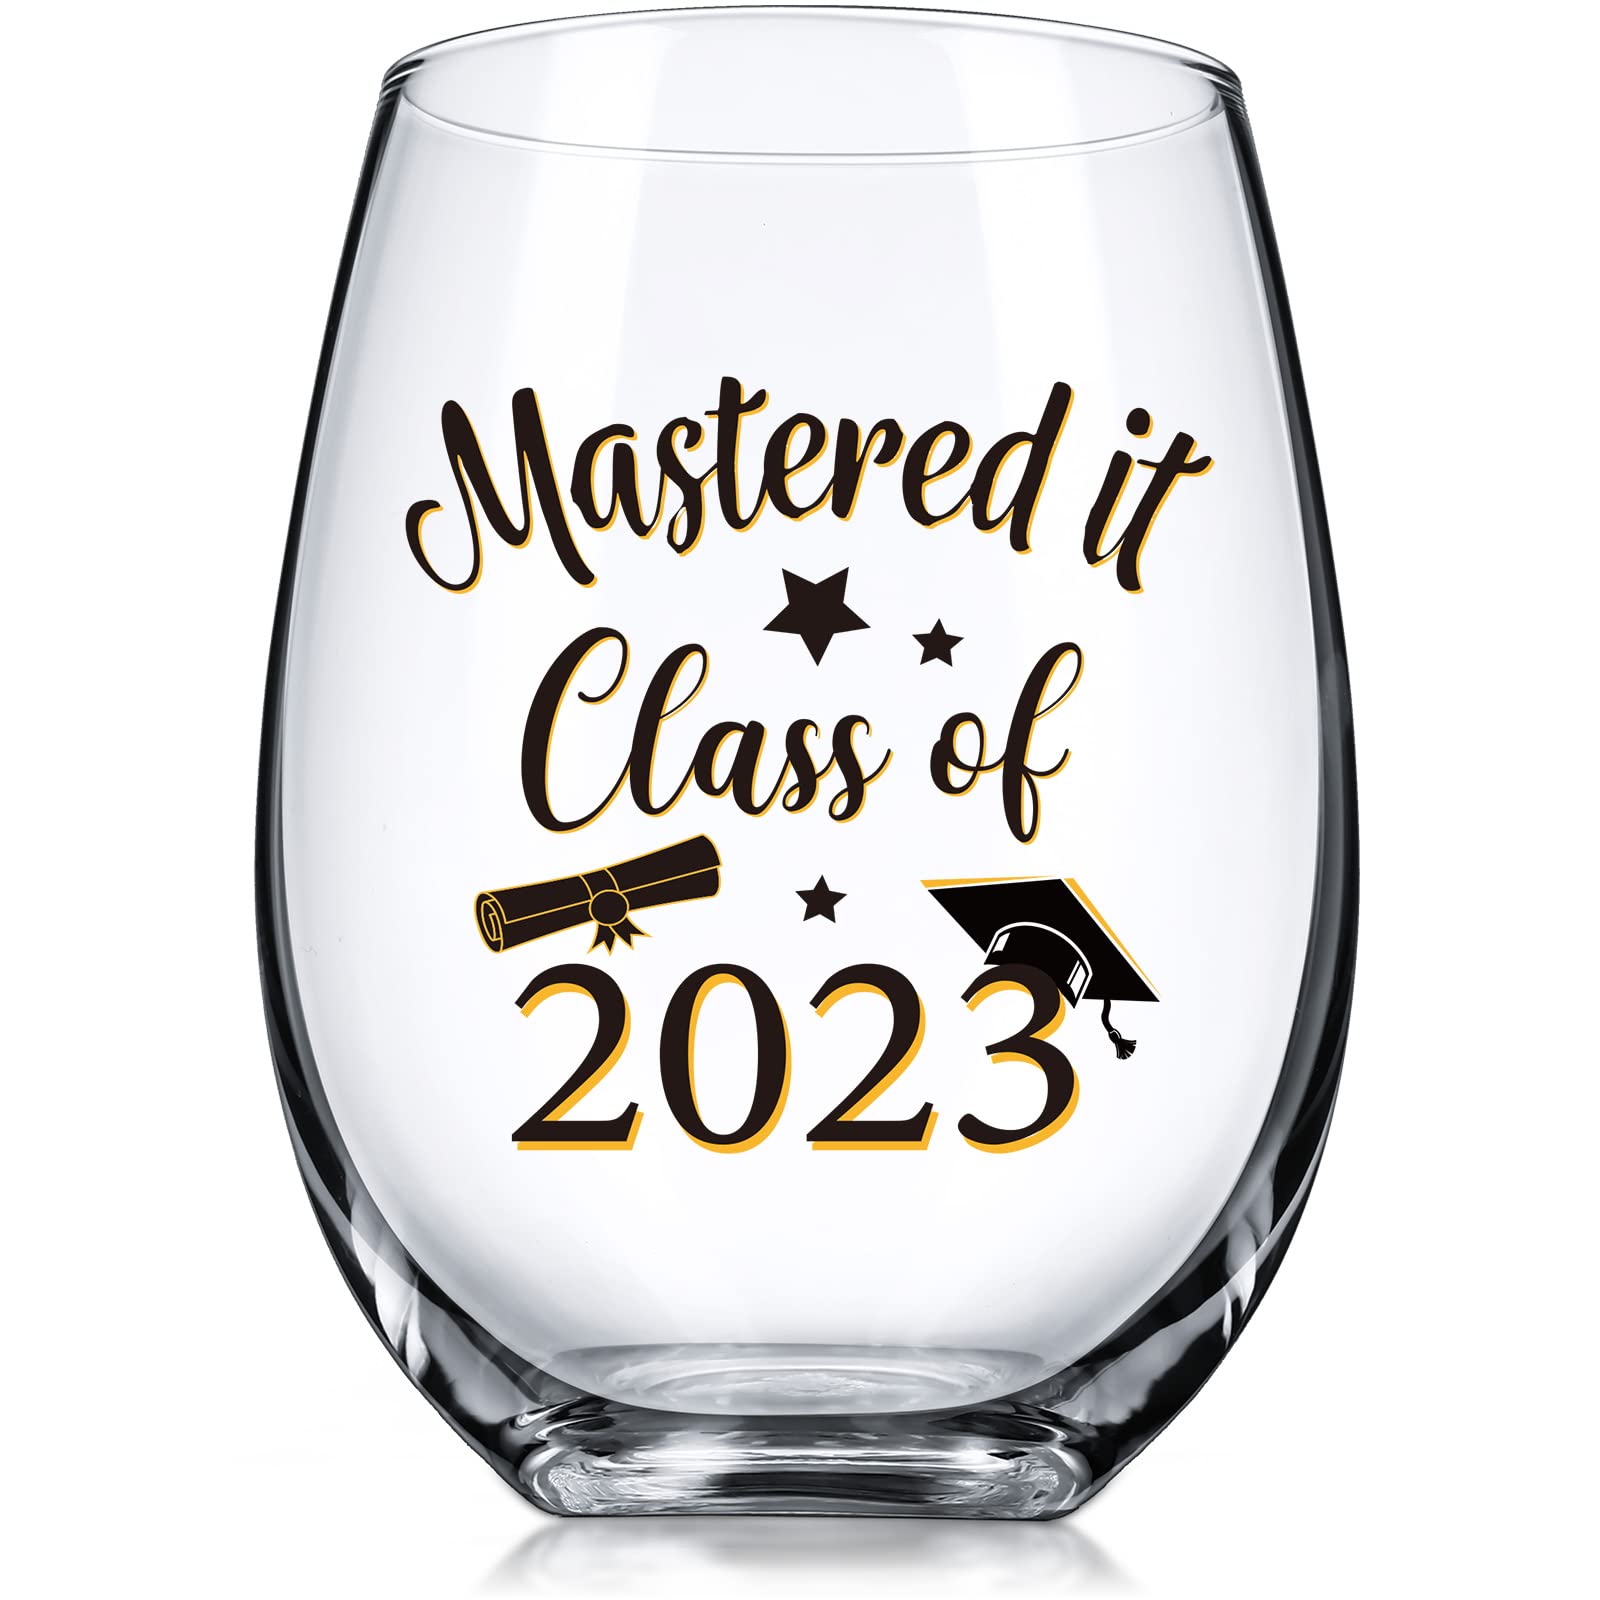 Mastered It Class of 2023 Graduation Wine Glass Graduation Inspirational Gifts 17 oz Stemless Wine Glass for Him Her High School University Graduate College Grad Mastering Degree